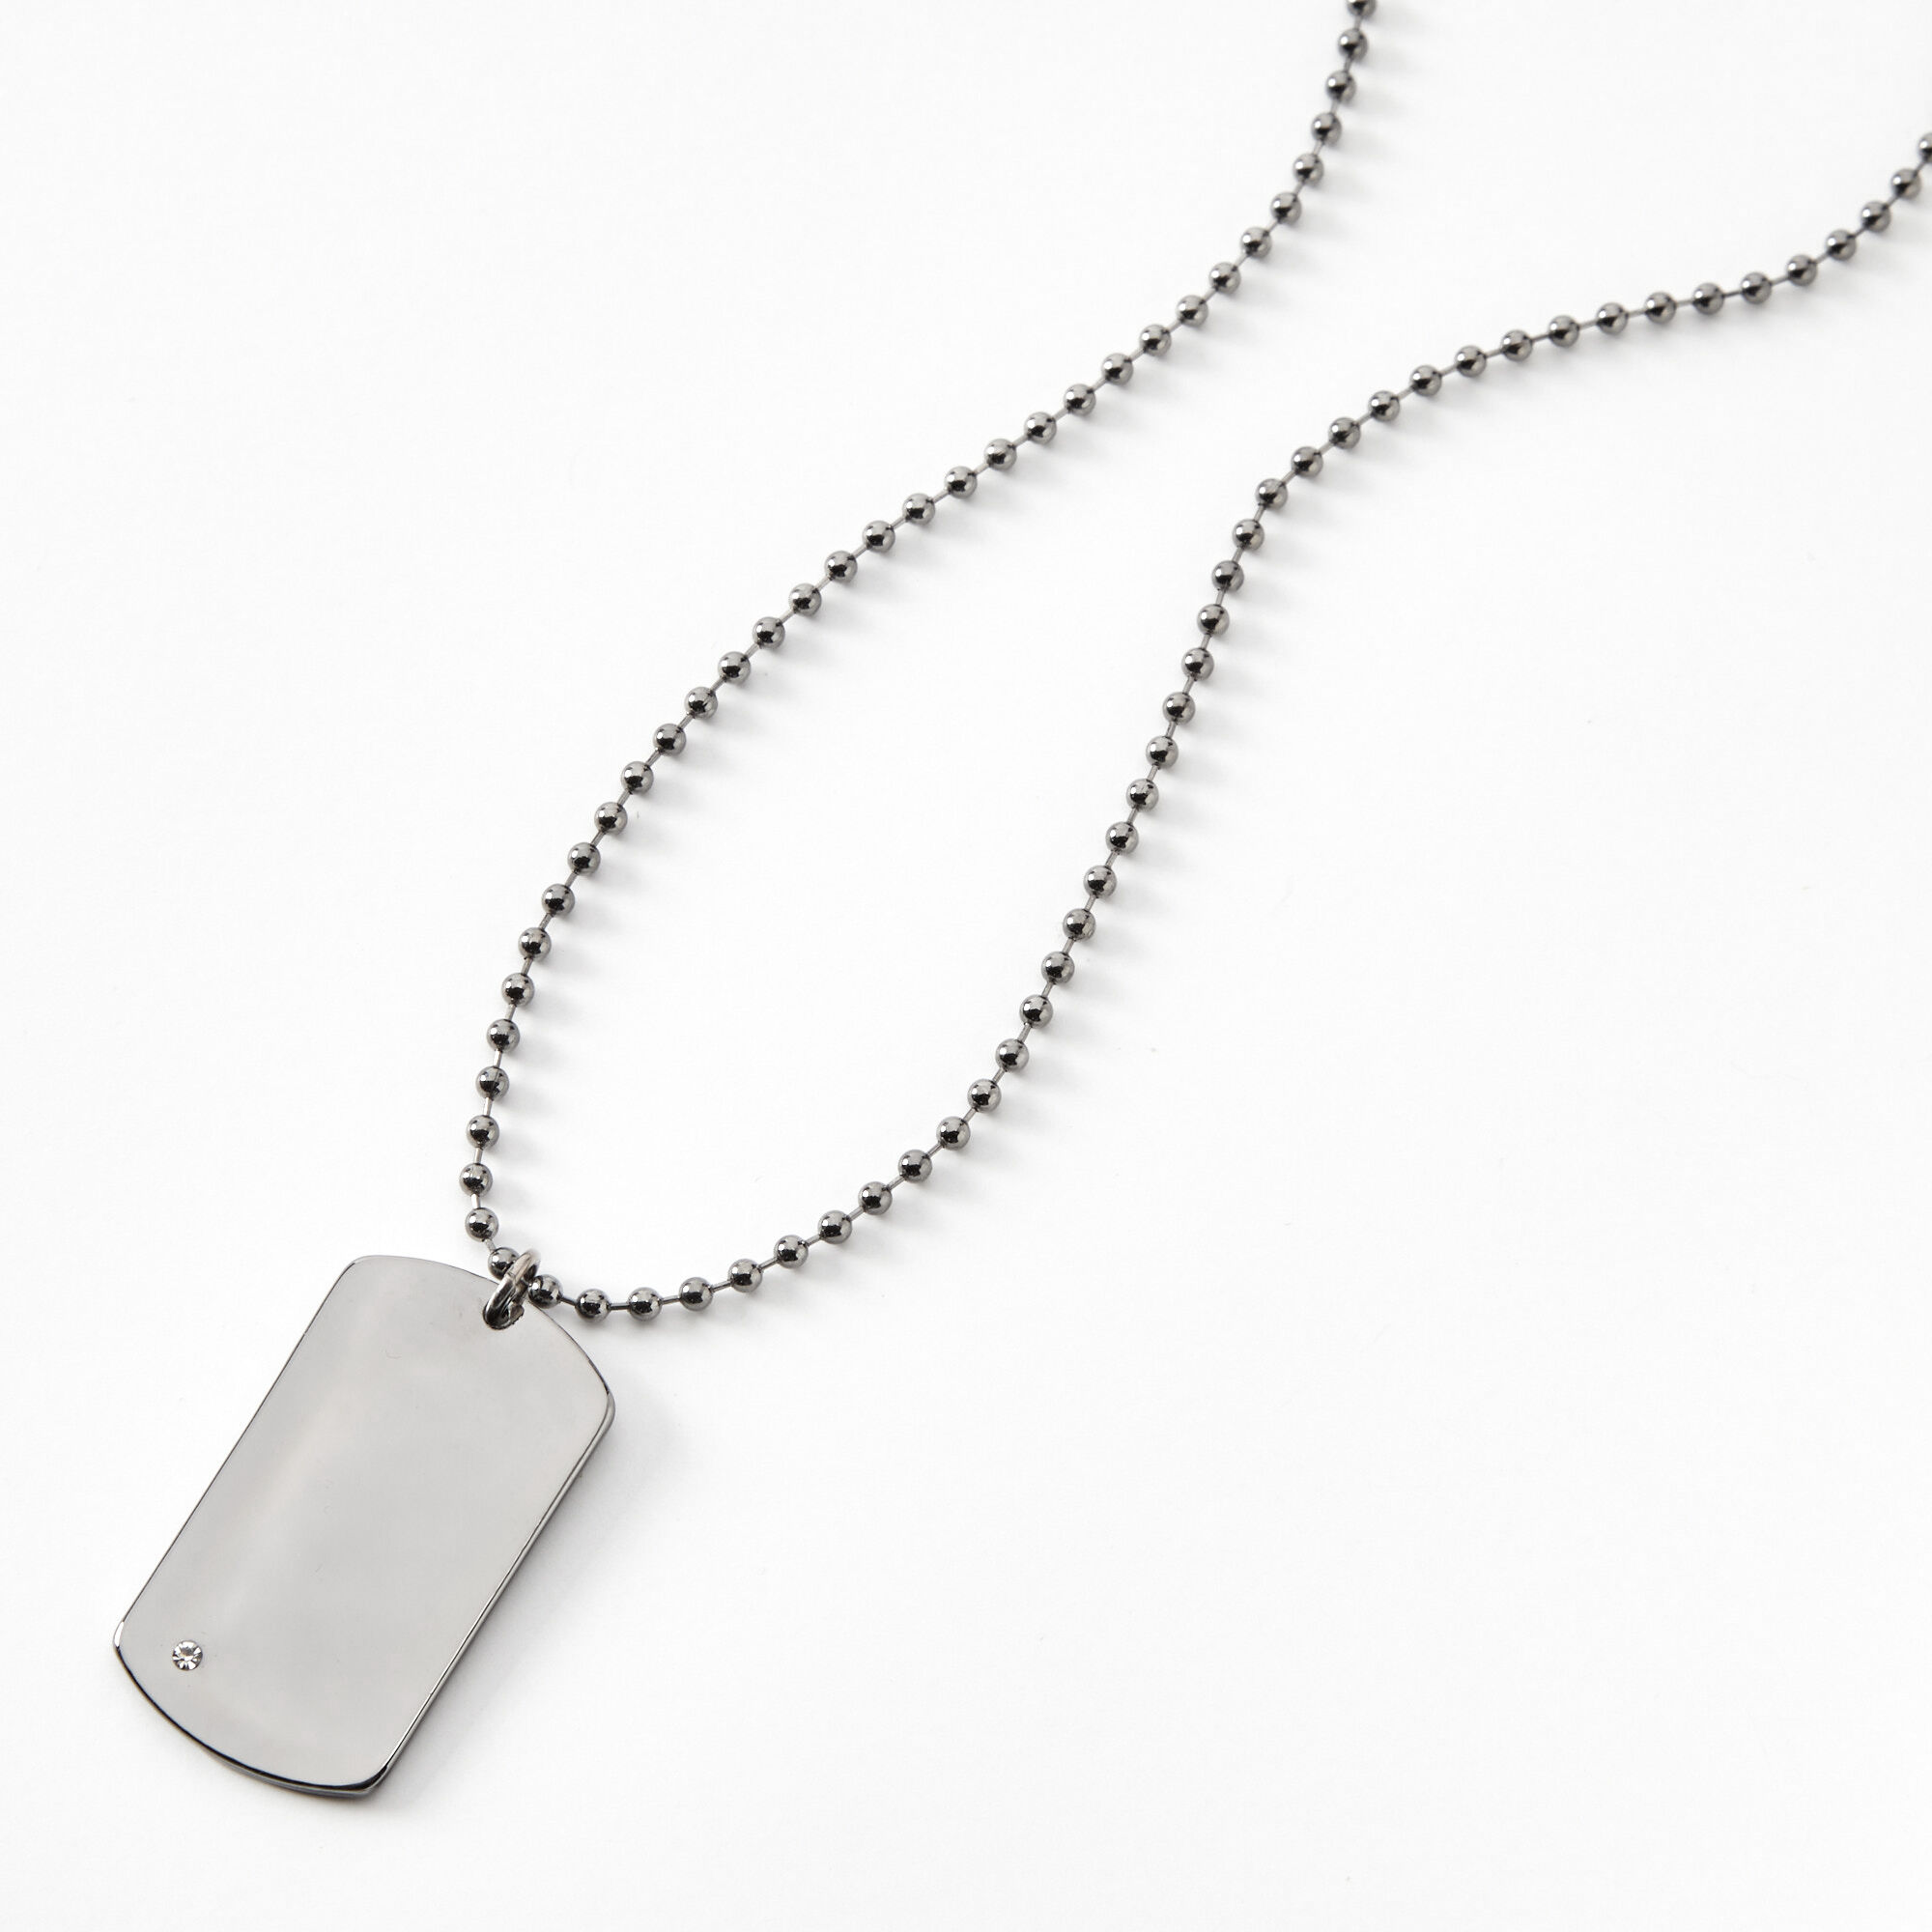 Silver Dog Tag Pendant Chain Necklace